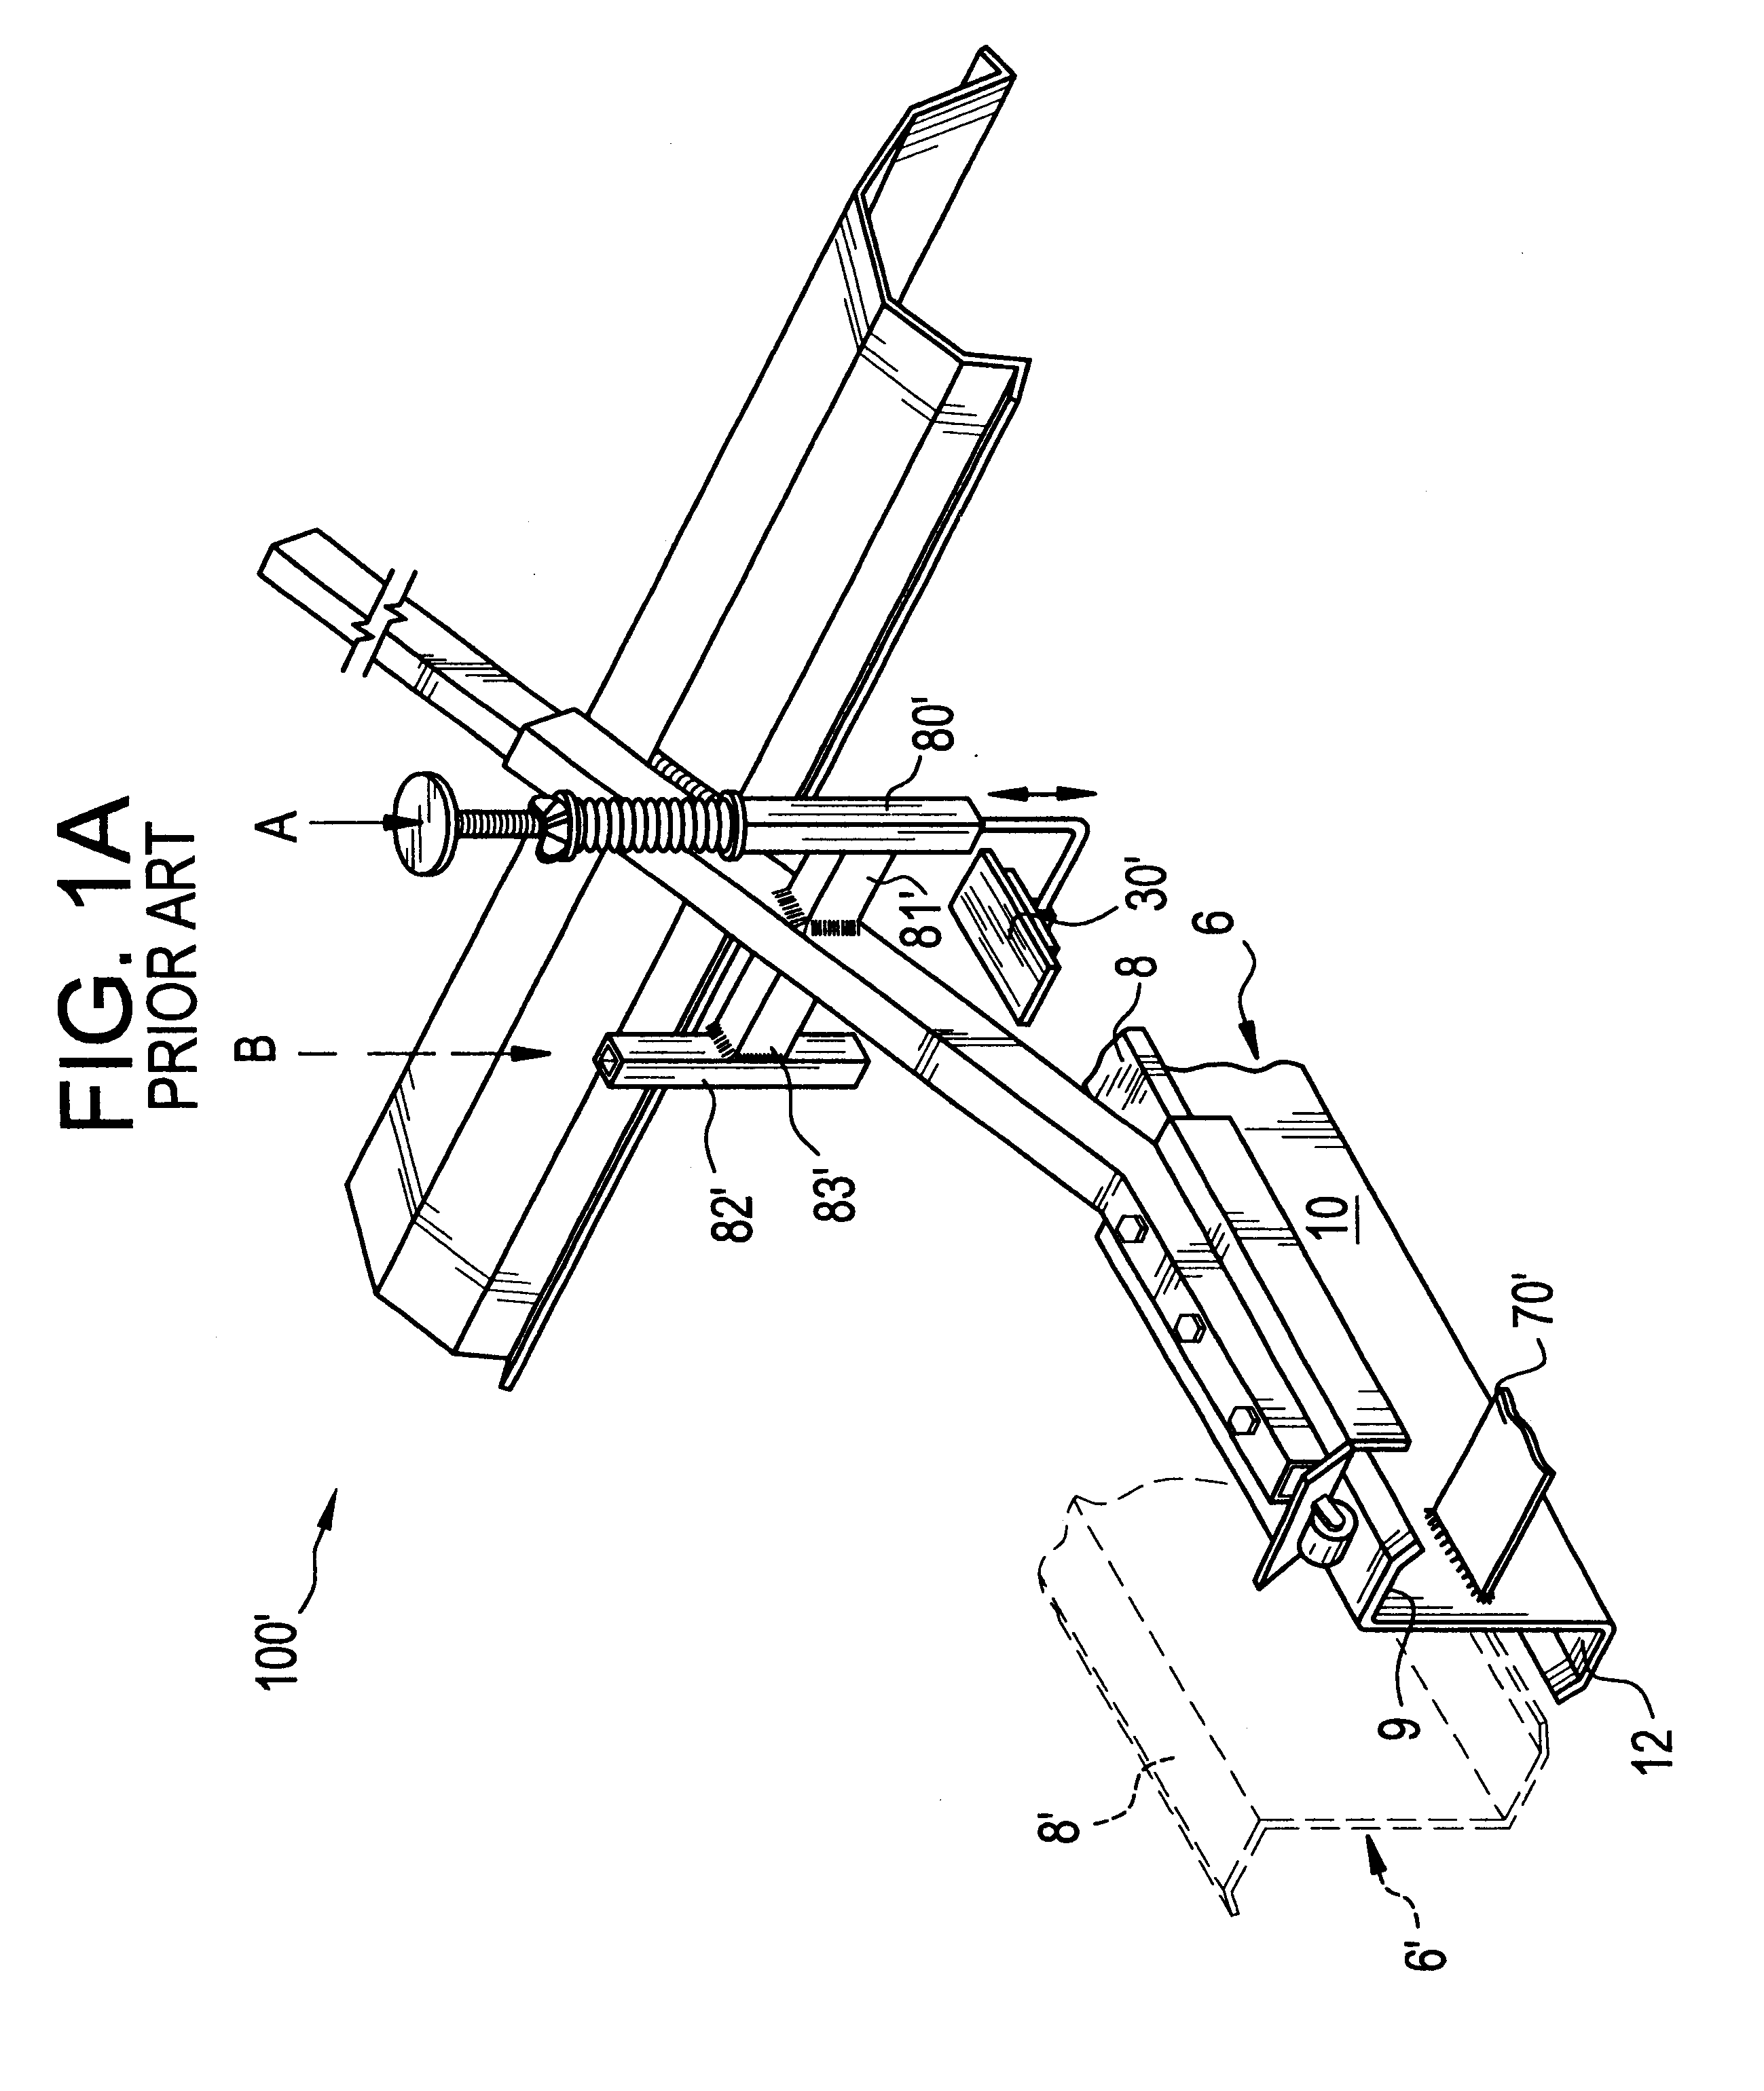 Rolled fabric dispensing apparatus and fall protection system and method